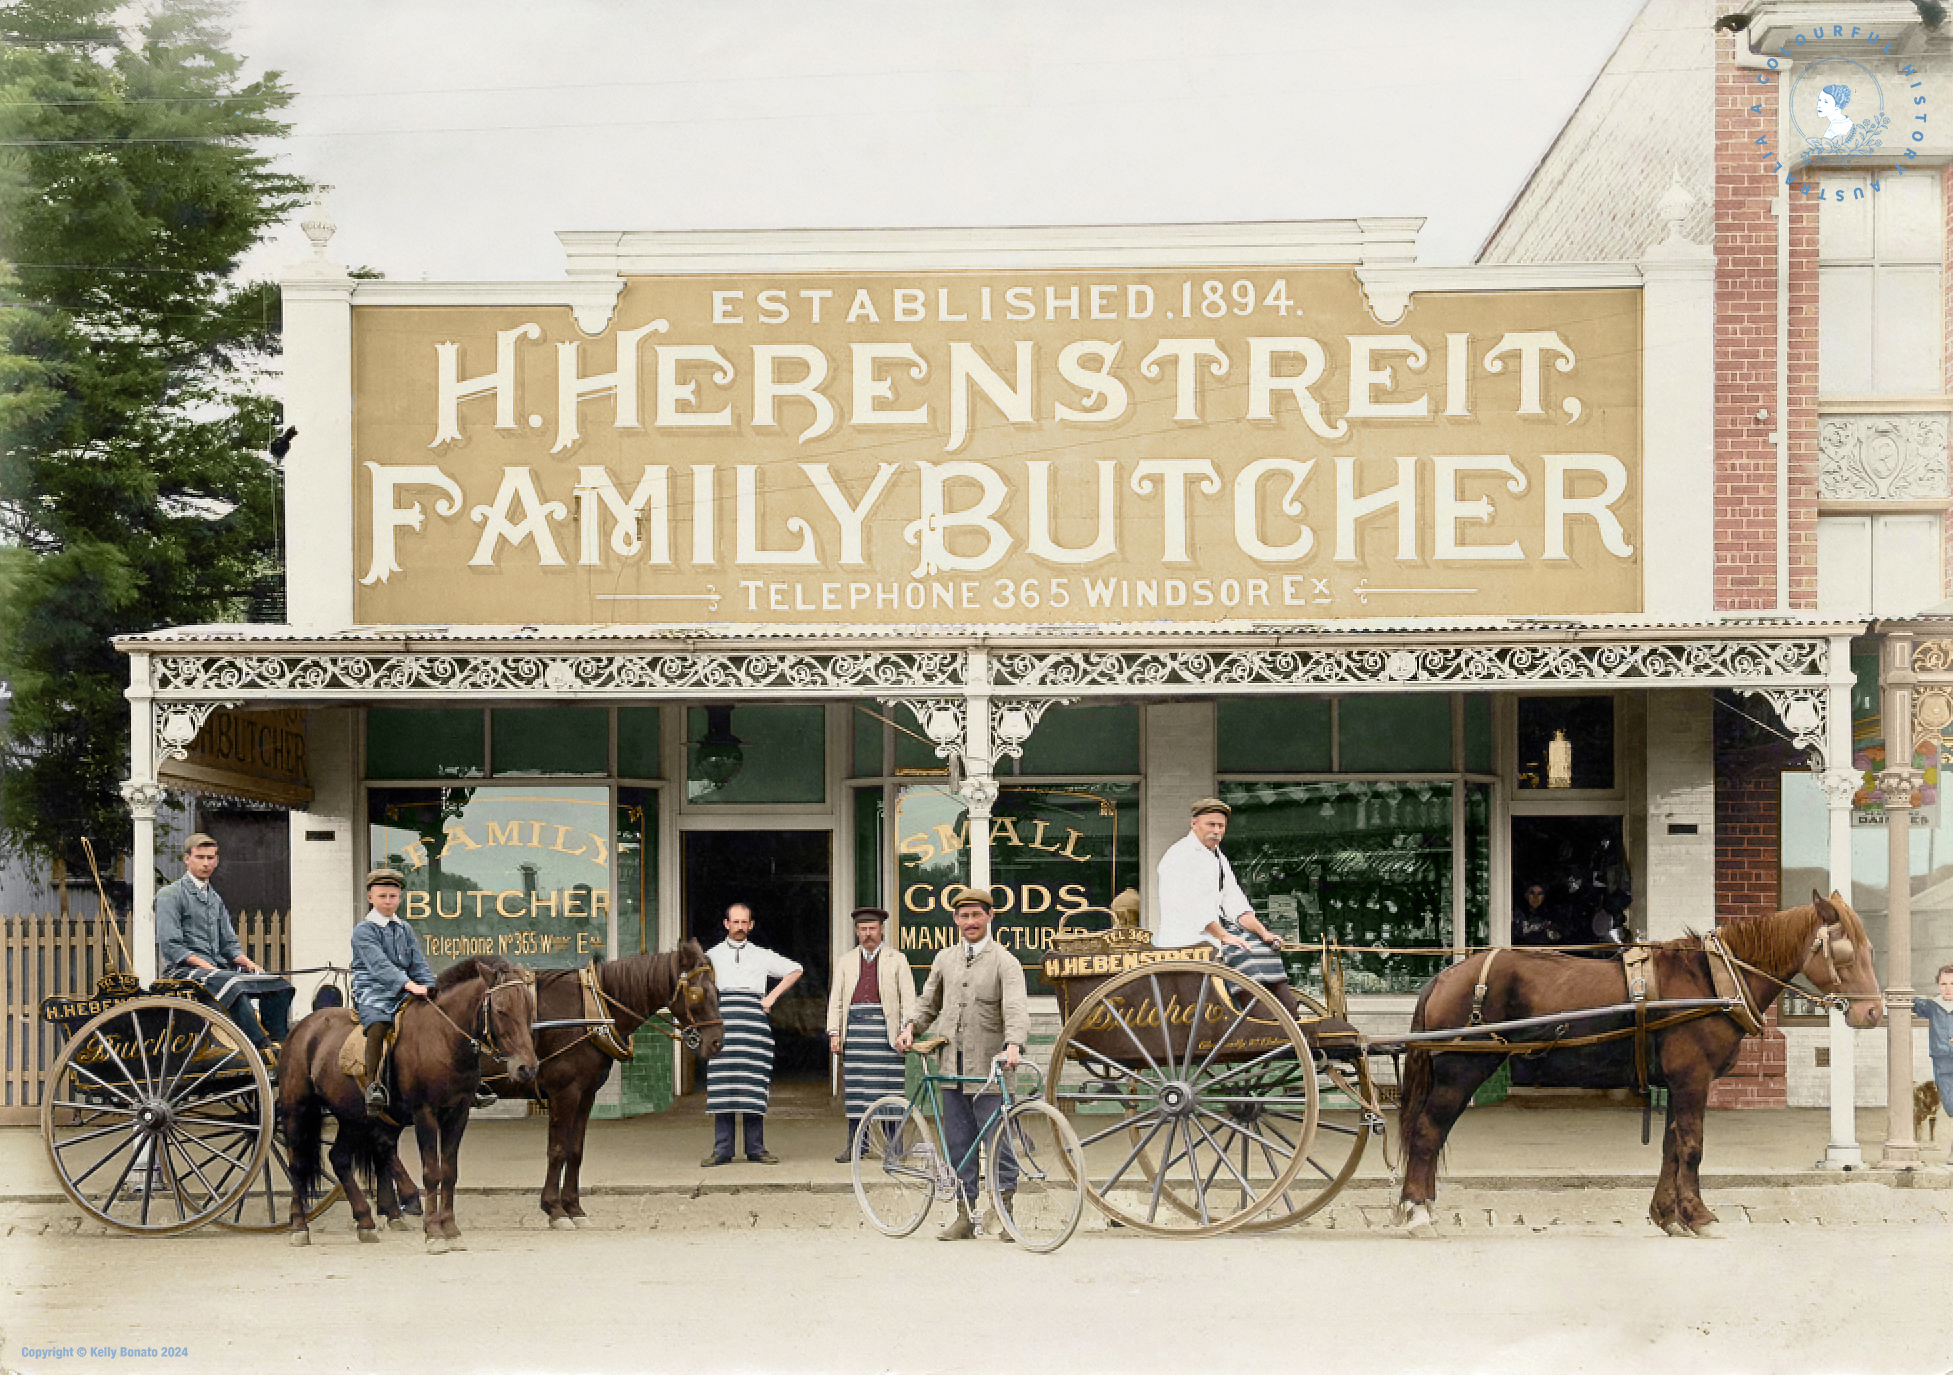 6 people and two horse and carriages standing out the front of a butchershop